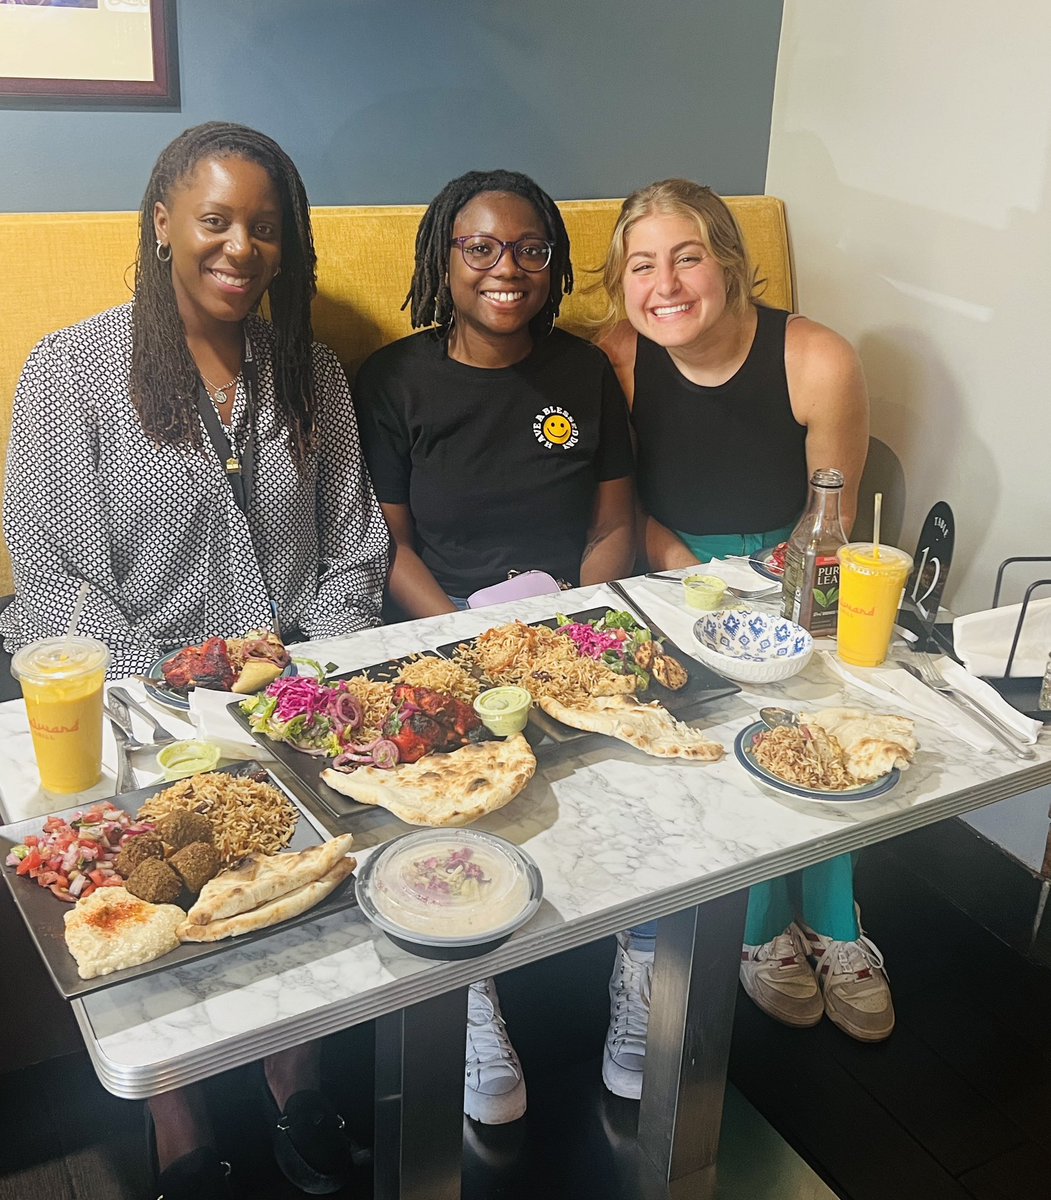 Today we had a fun #TeamTownsel lunch! Grateful for my #MasterConsenters and #SampleCollectionSpecialists - couldn't do this research without them #Makeda #Sarah & #Alexa 🙌🏾🍴 #TeamworkMakesTheDreamWork @UMmedschool @IrinaBurd @FNDNforSMFM